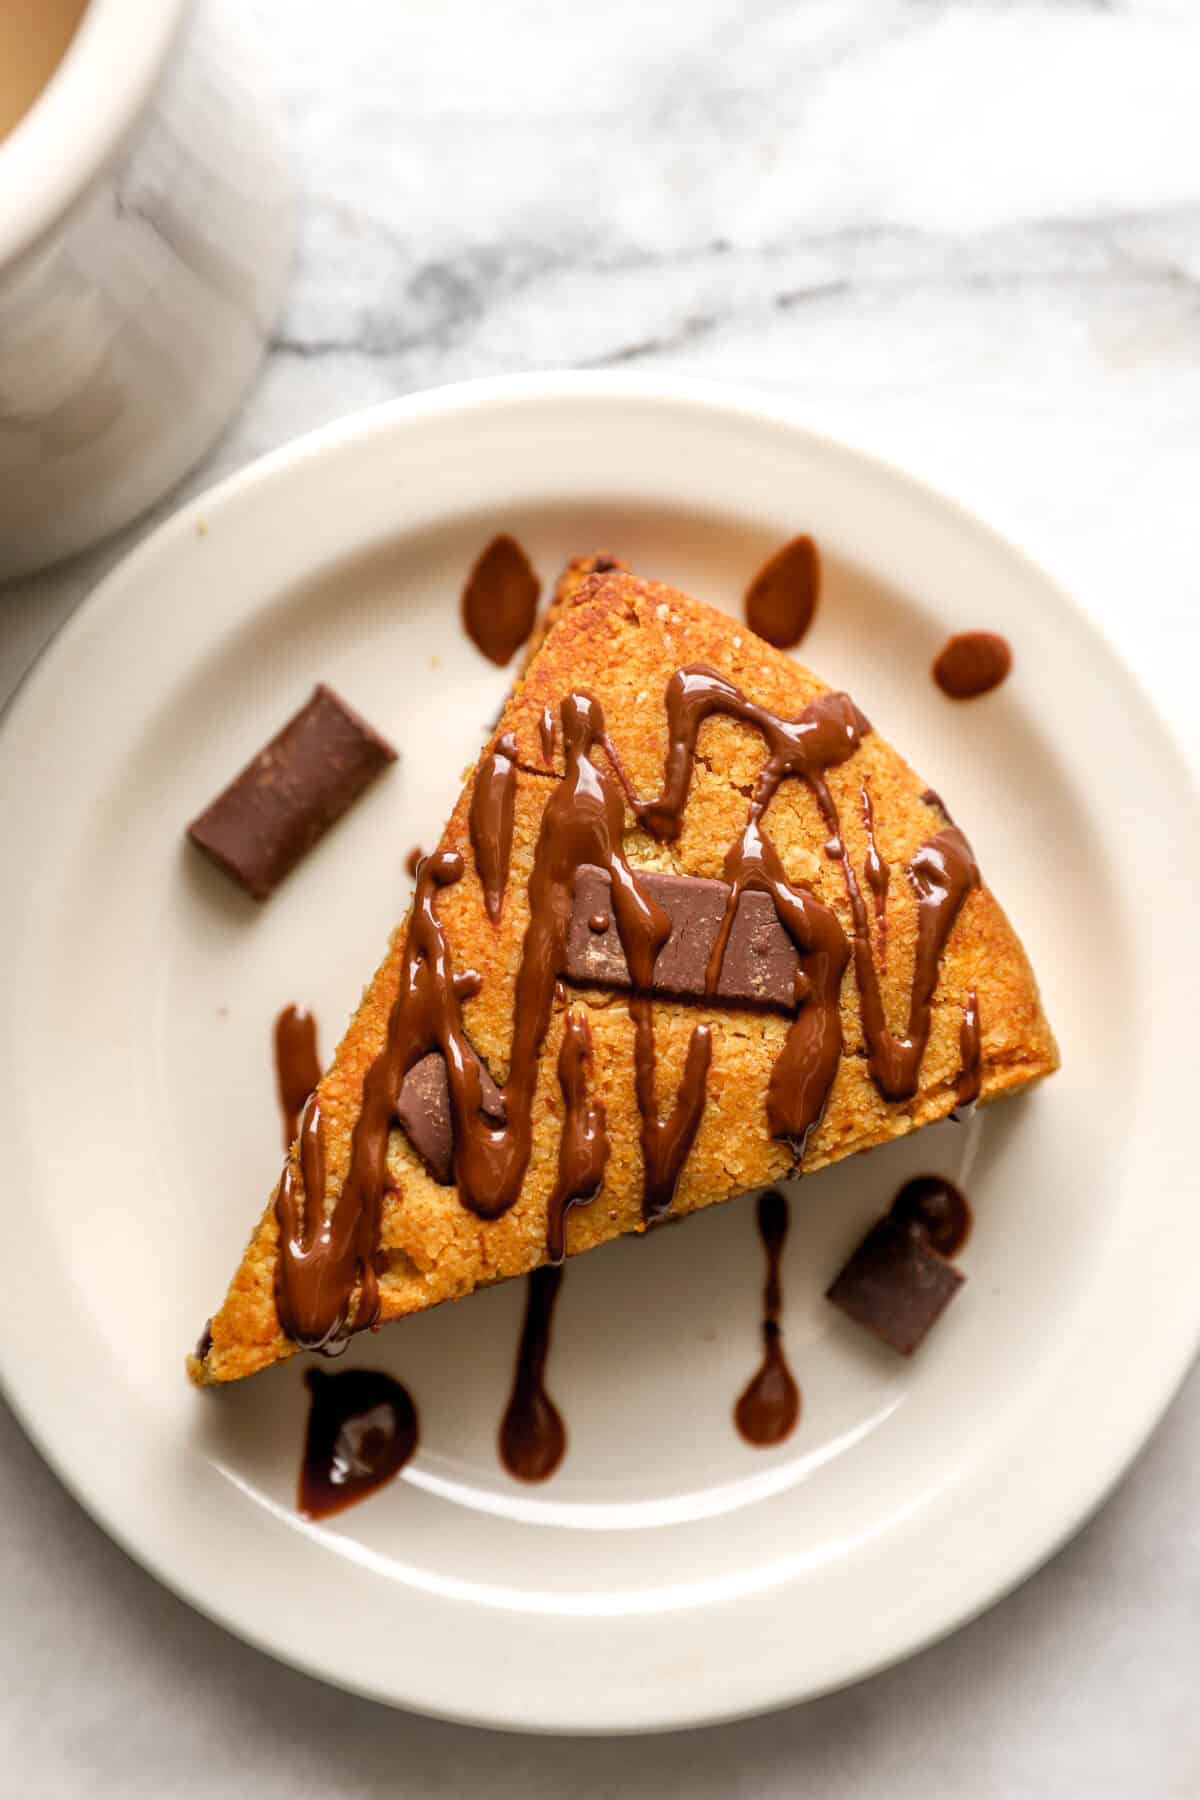 Pumpkin scones on a plate, drizzled with chocolate.